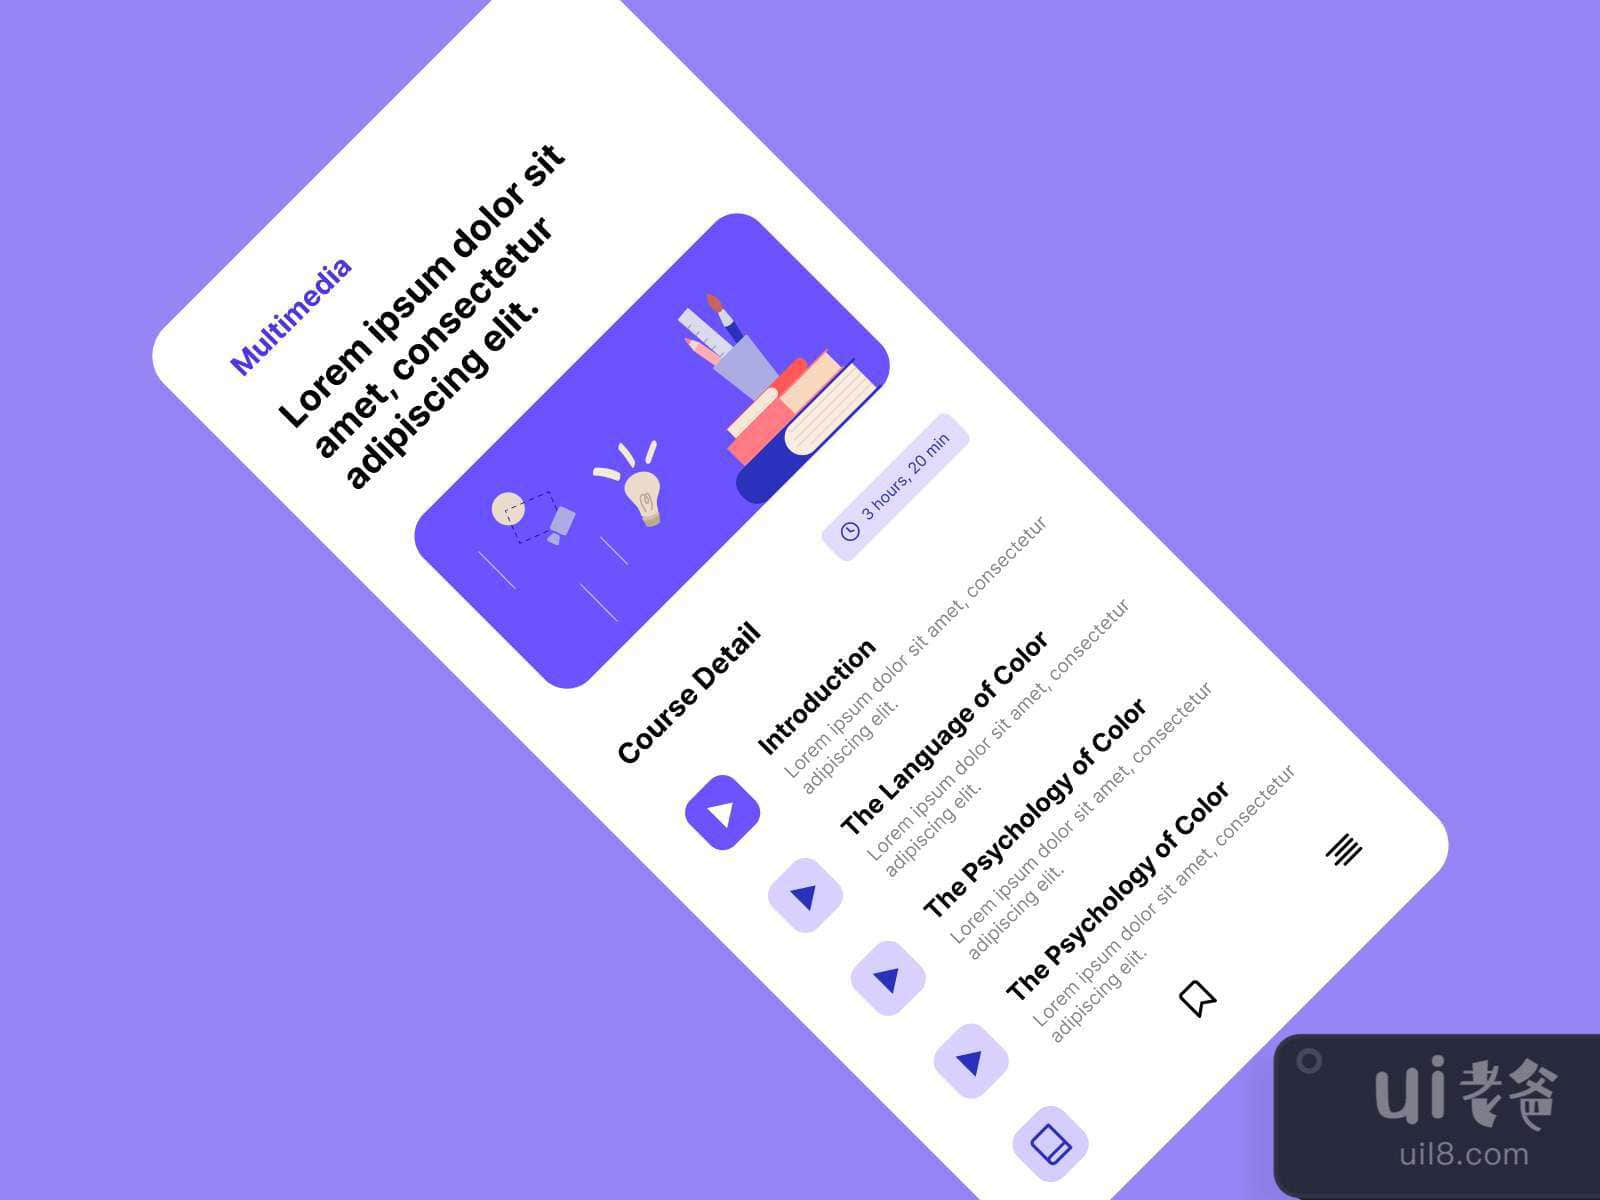 Online Learning App for Figma and Adobe XD No 3